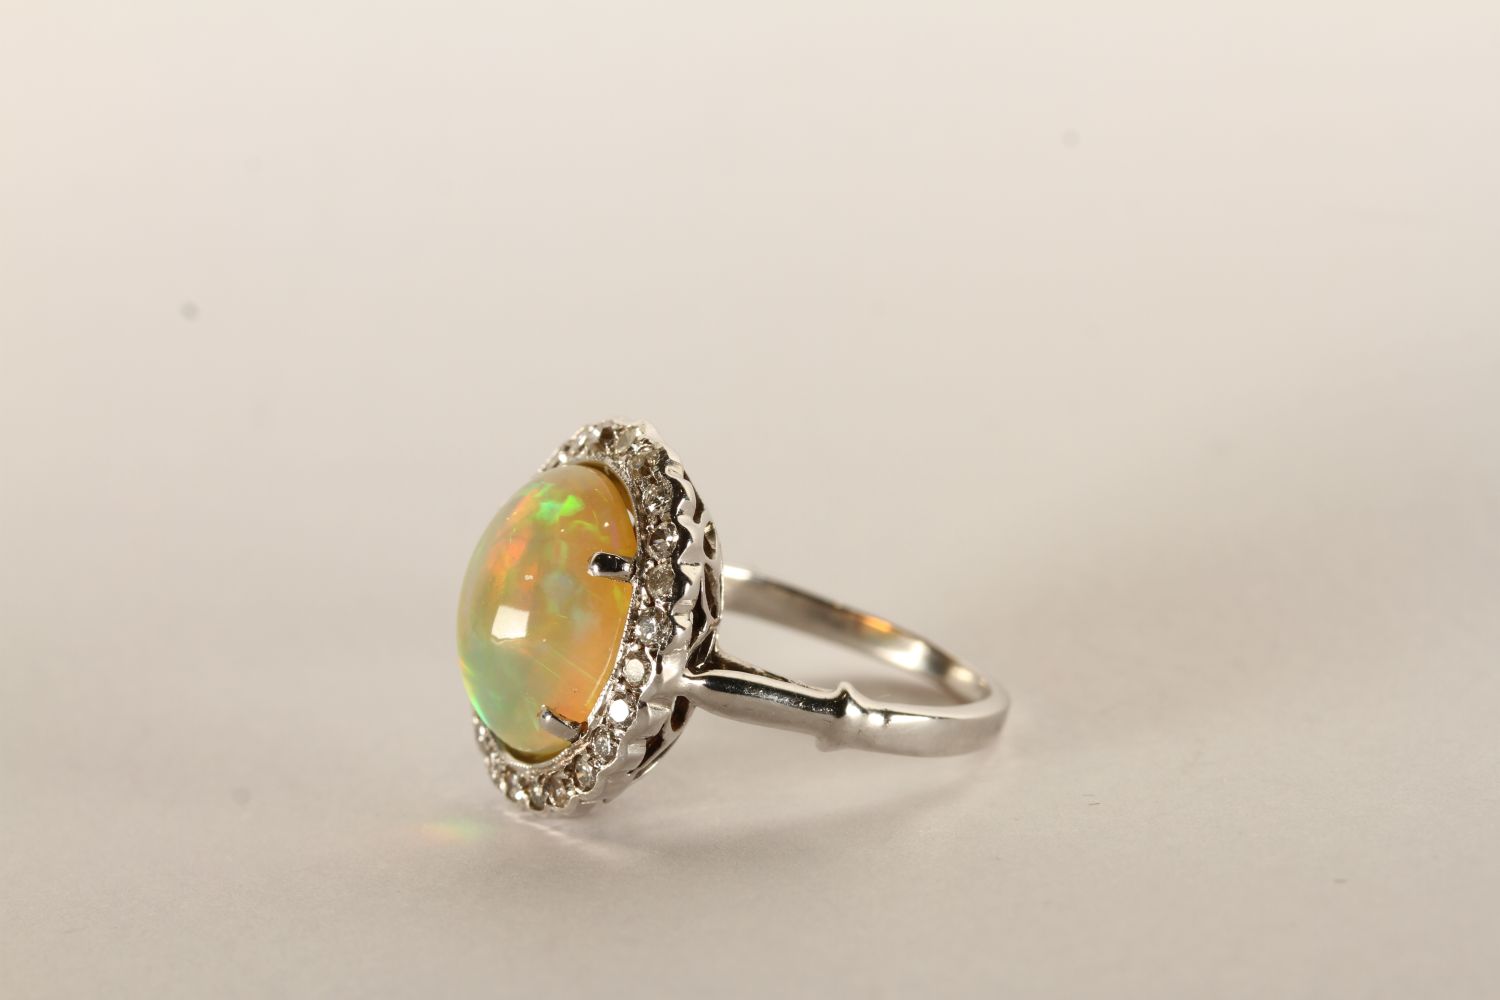 Opal and Diamond Cluster Ring, Cabochon Opal, 12.5x10mm, diamond surround, in 18ct white gold - Image 2 of 3